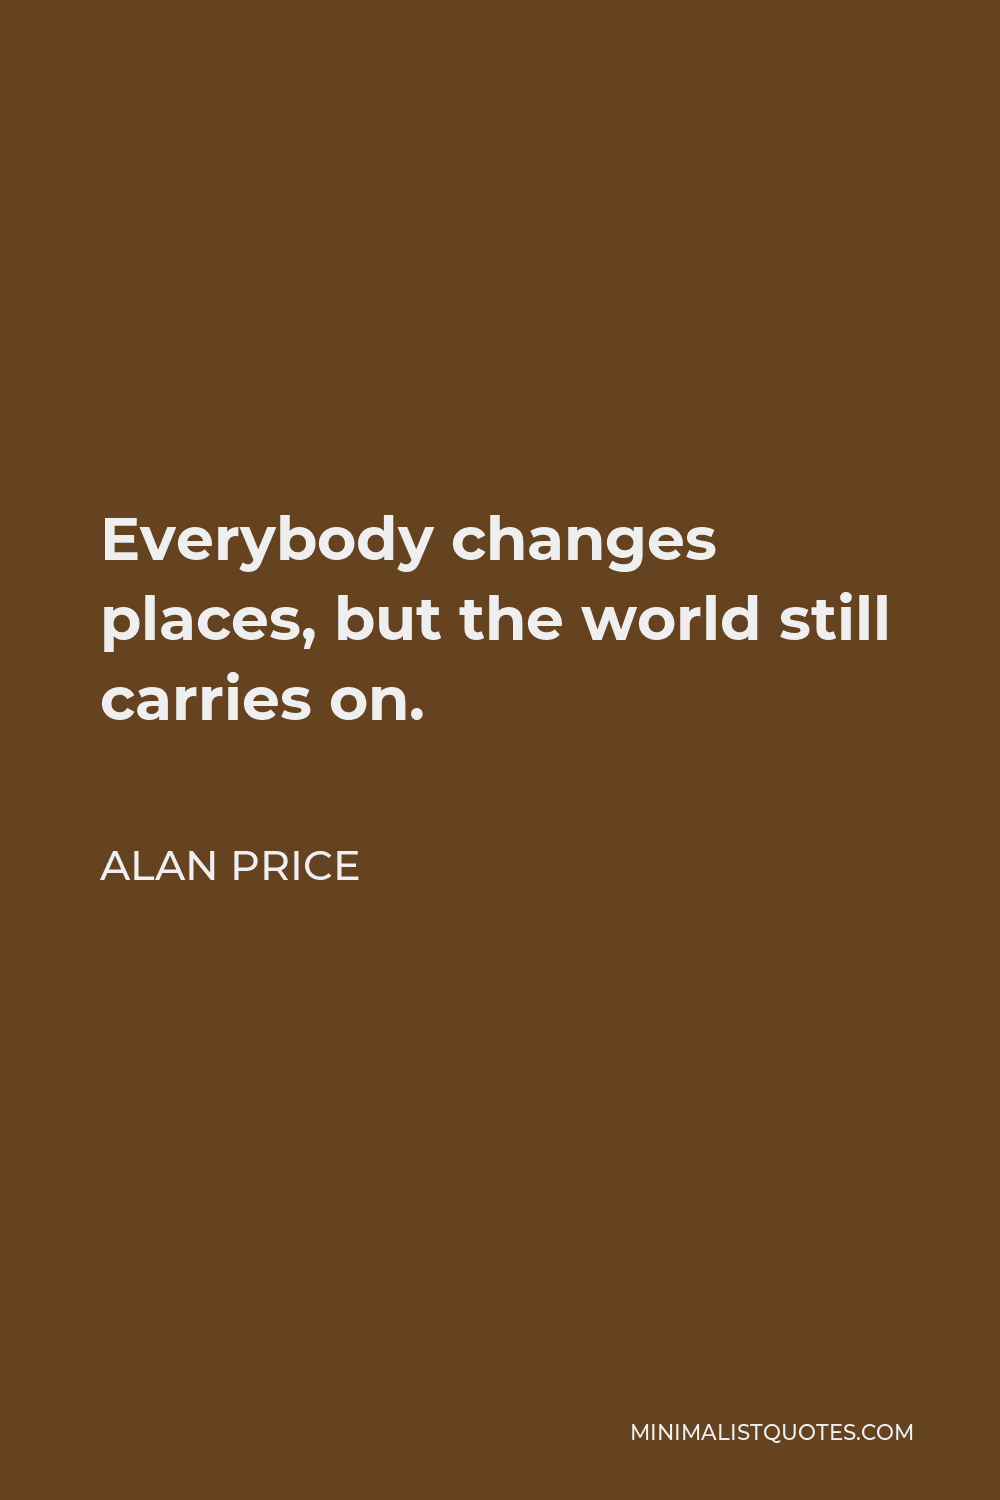 Alan Price Quote - Everybody changes places, but the world still carries on.